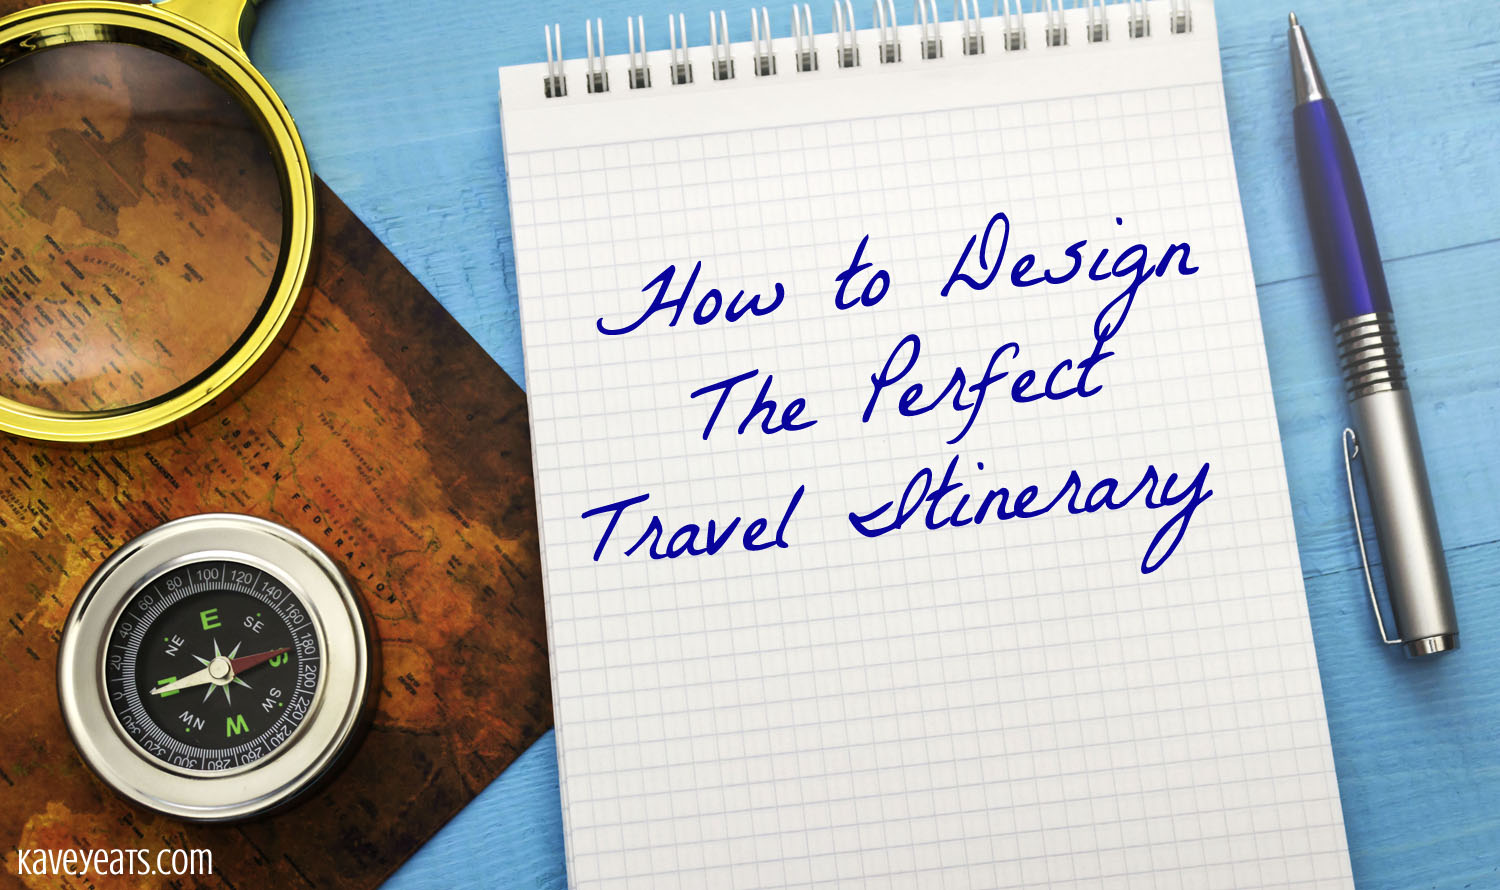 Hand writing onto a note pad the text "how to design the perfect travel itinerary"